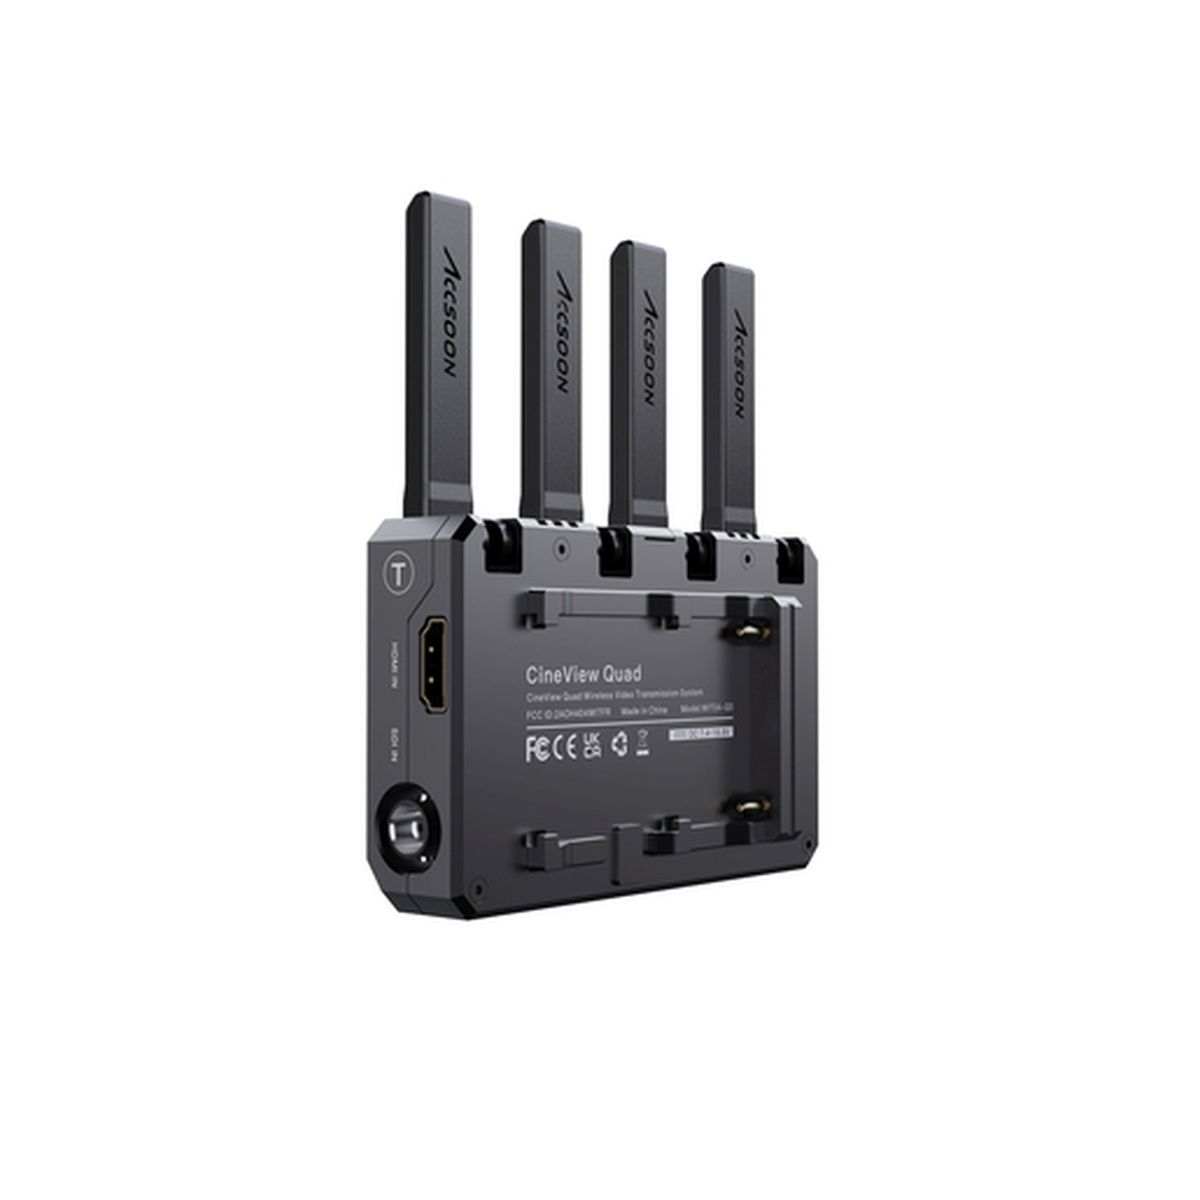 Accsoon CineView Quad Transmitter / Receiver System